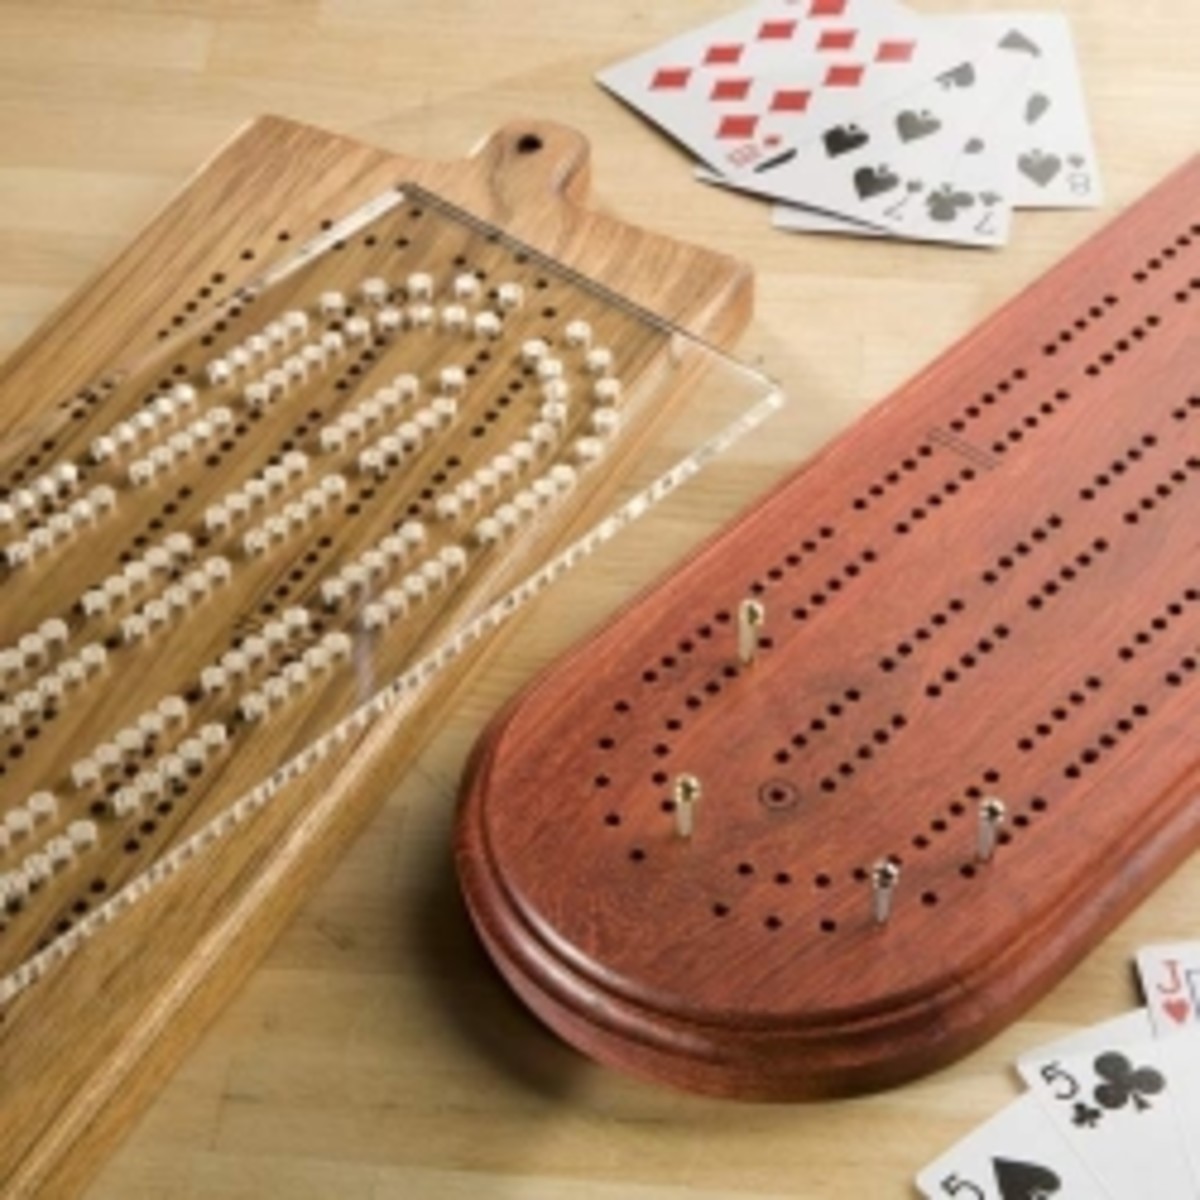 3-best-cribbage-board-templates-by-rockler-make-great-gifts-for-the